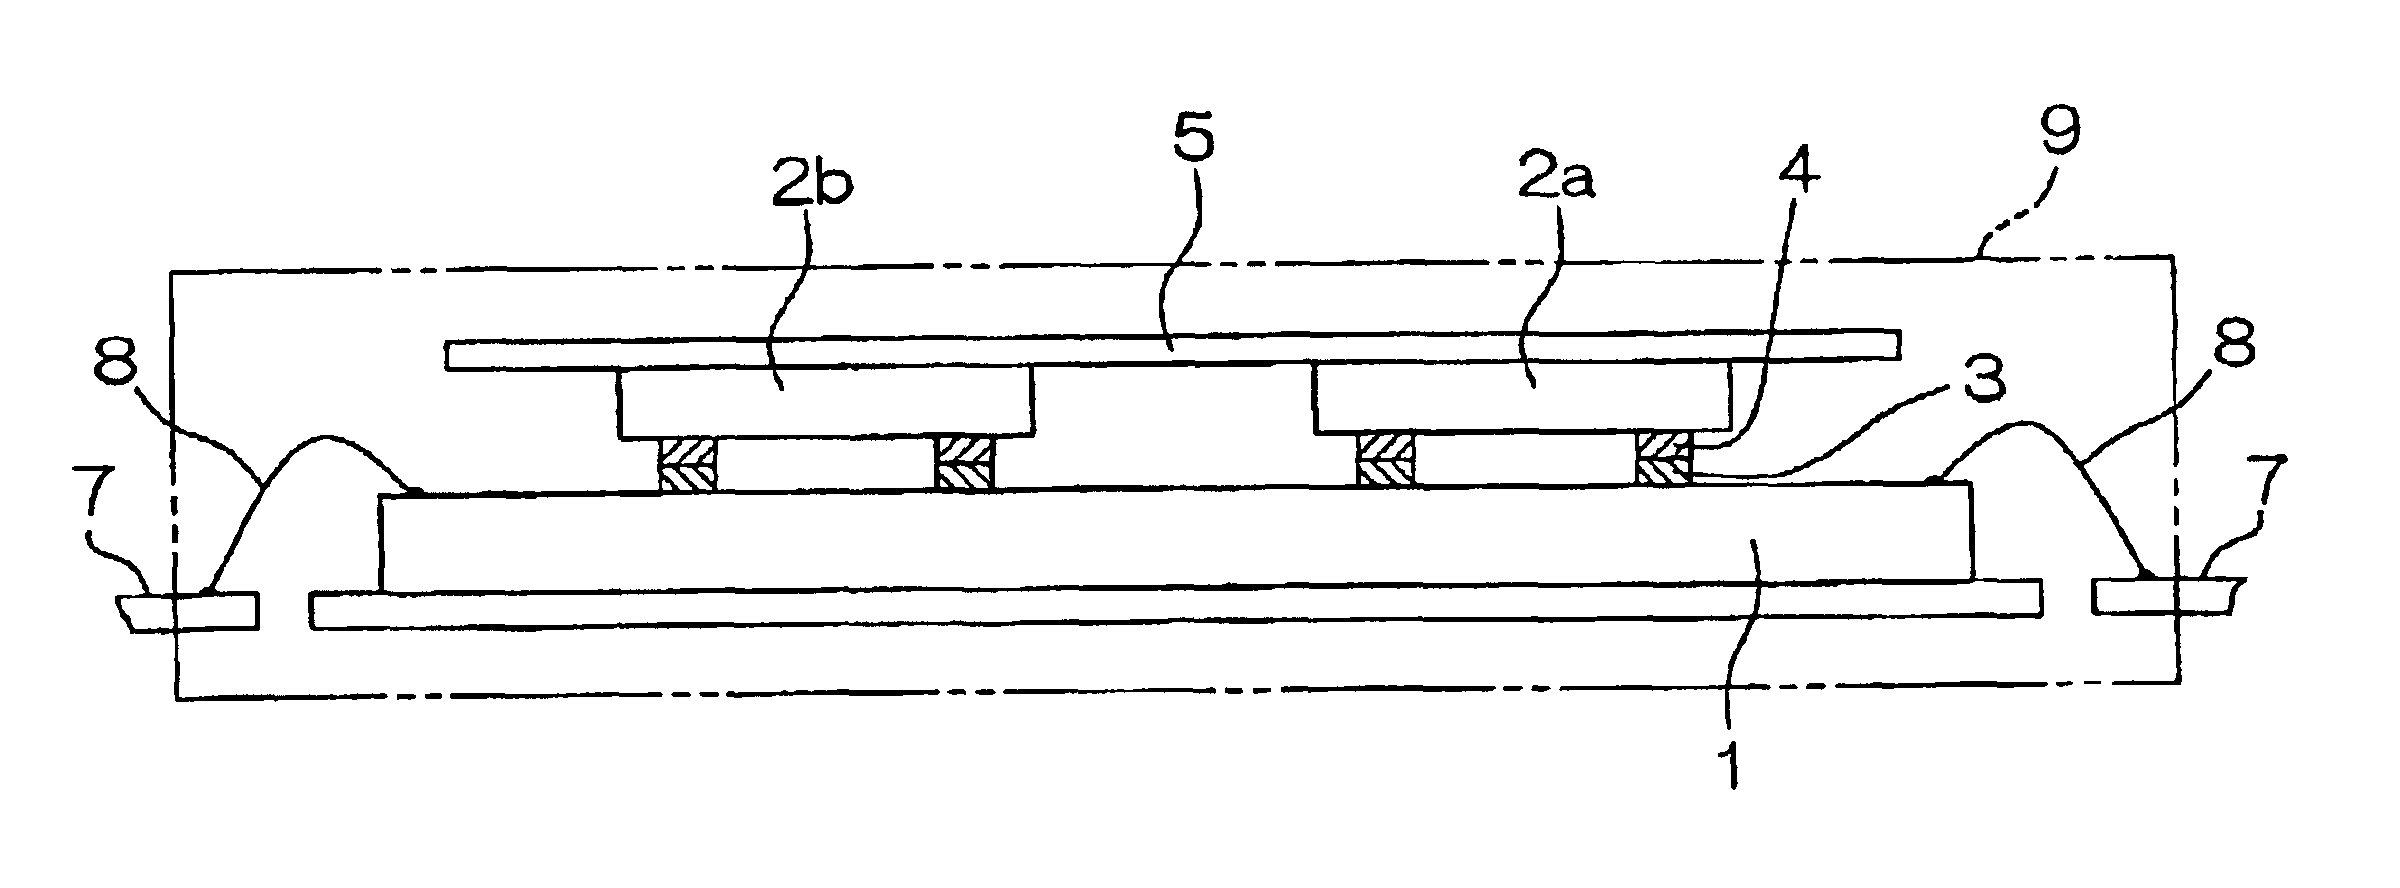 Semiconductor device having a primary chip with bumps in joined registration with bumps of a plurality of secondary chips